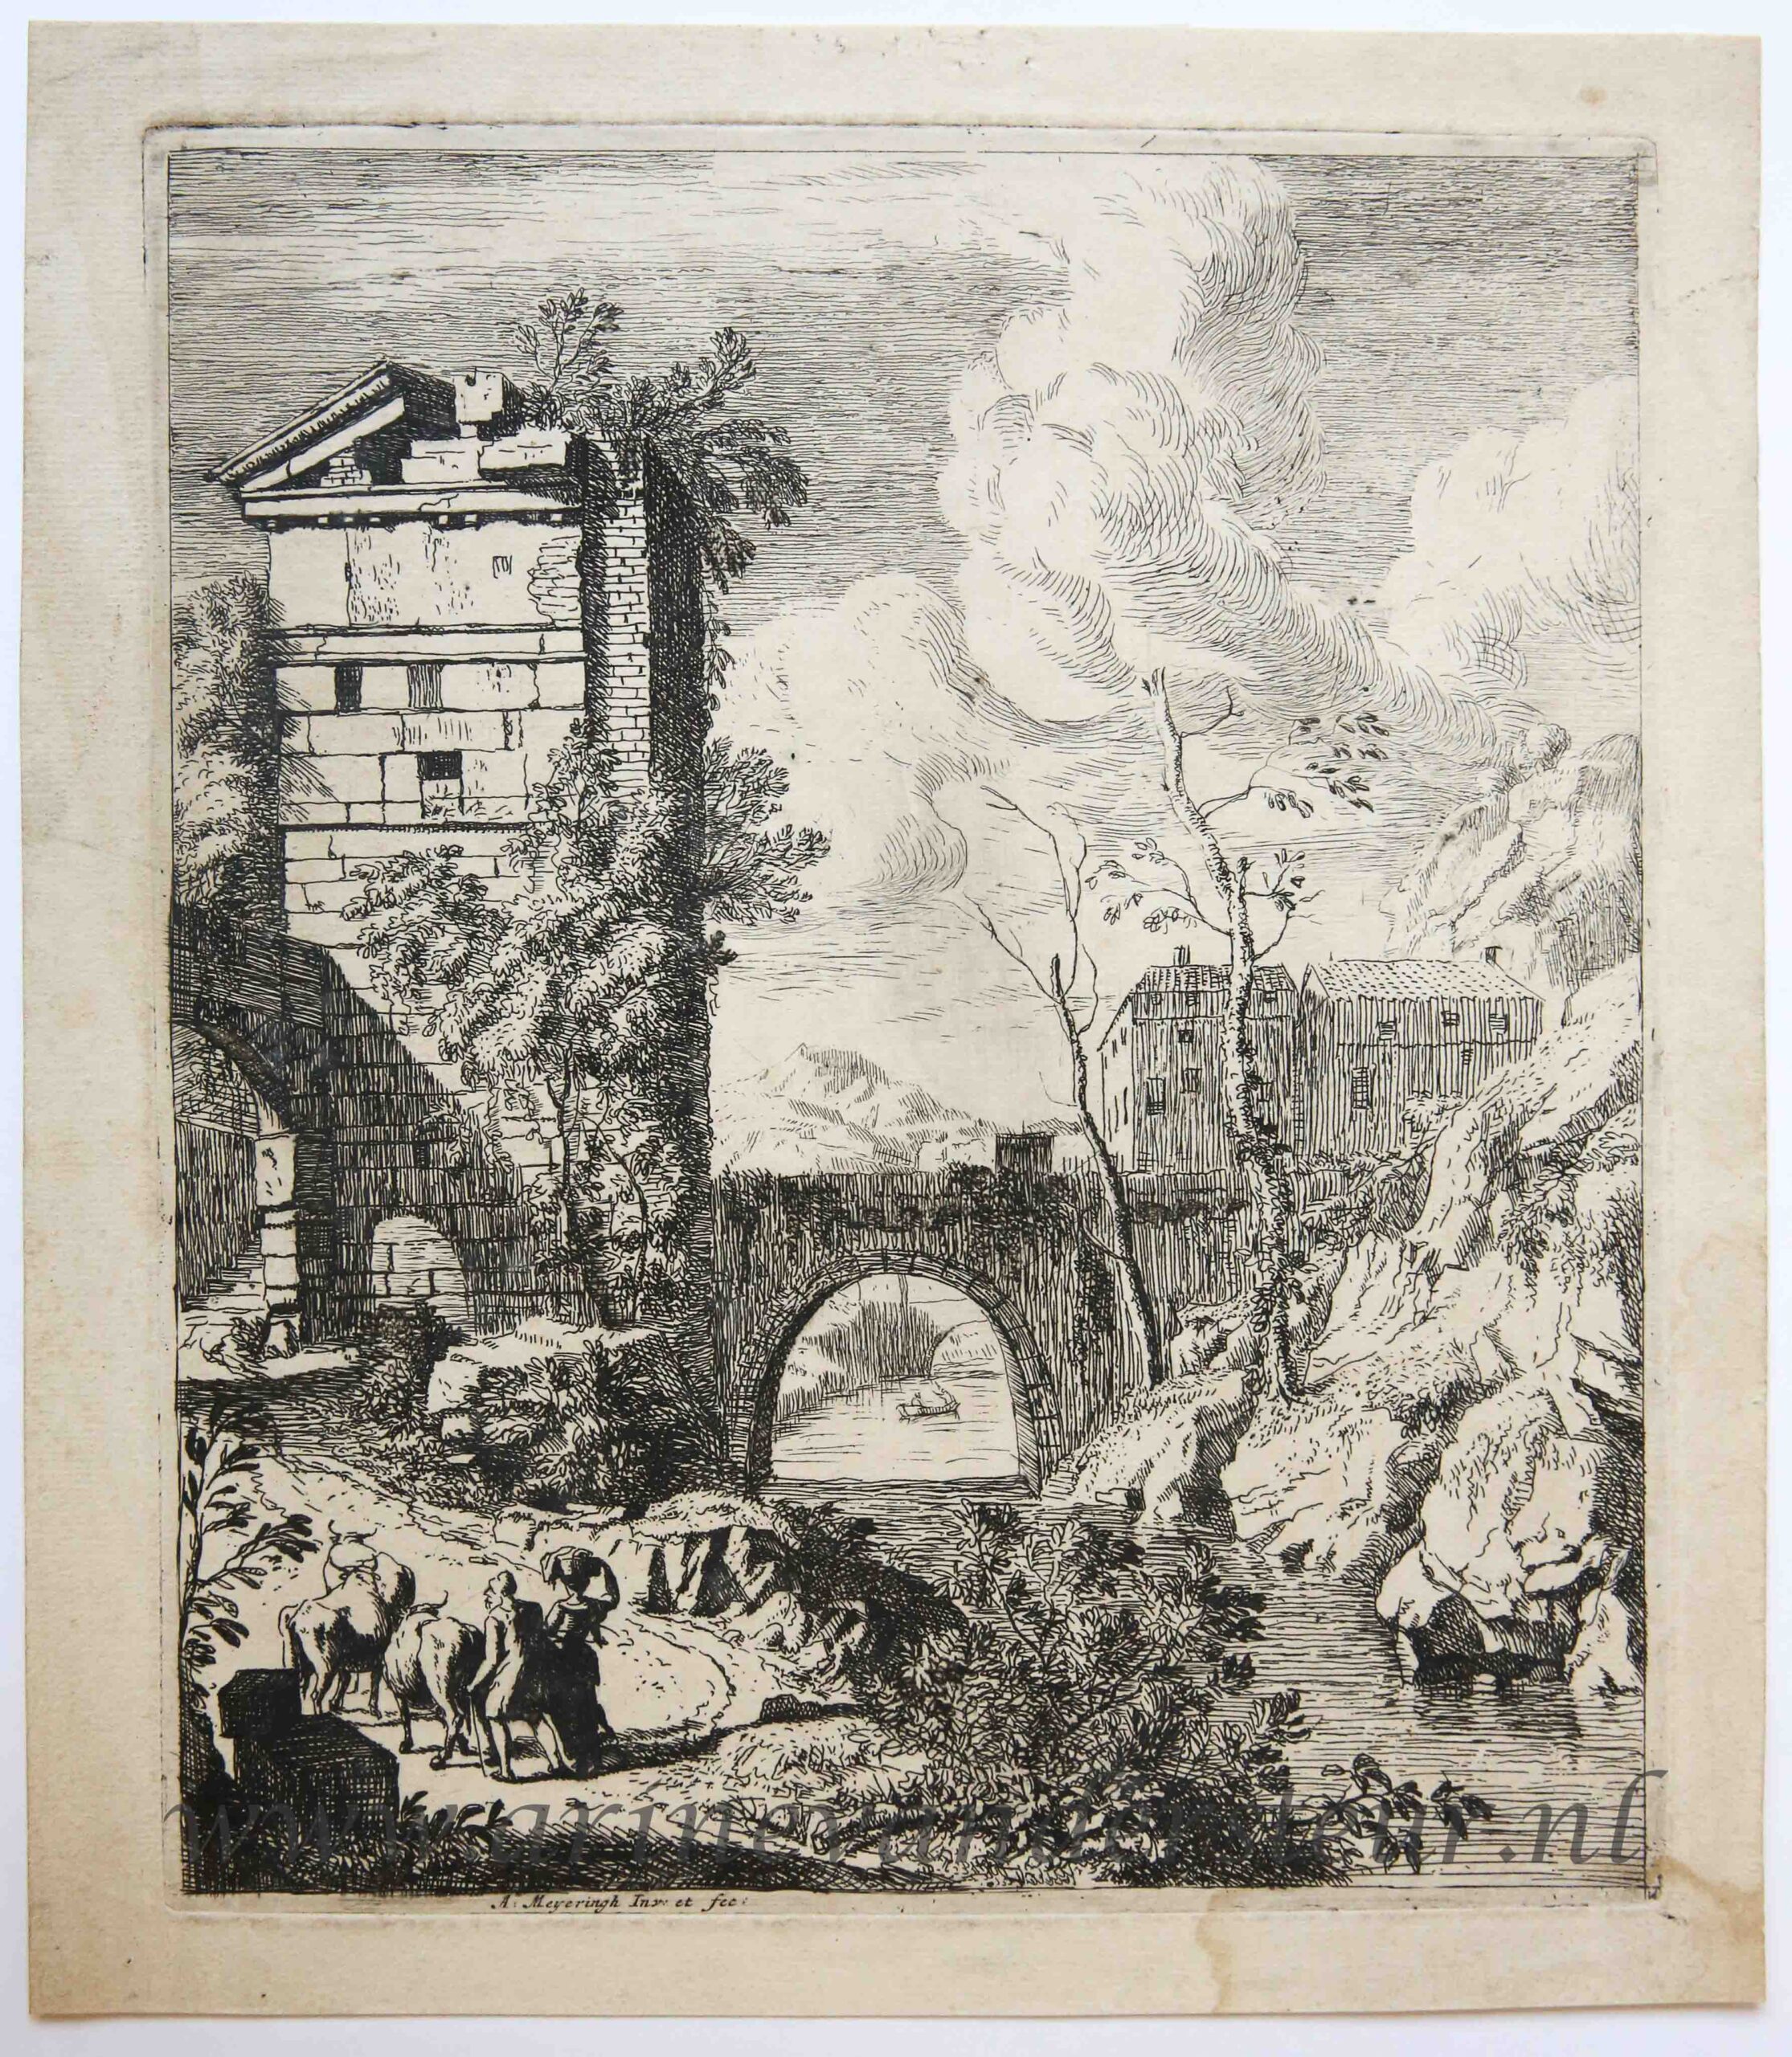 [Antique print, etching/ets] Landscape with a ruined tower/Landschap met ruine, published 1695.